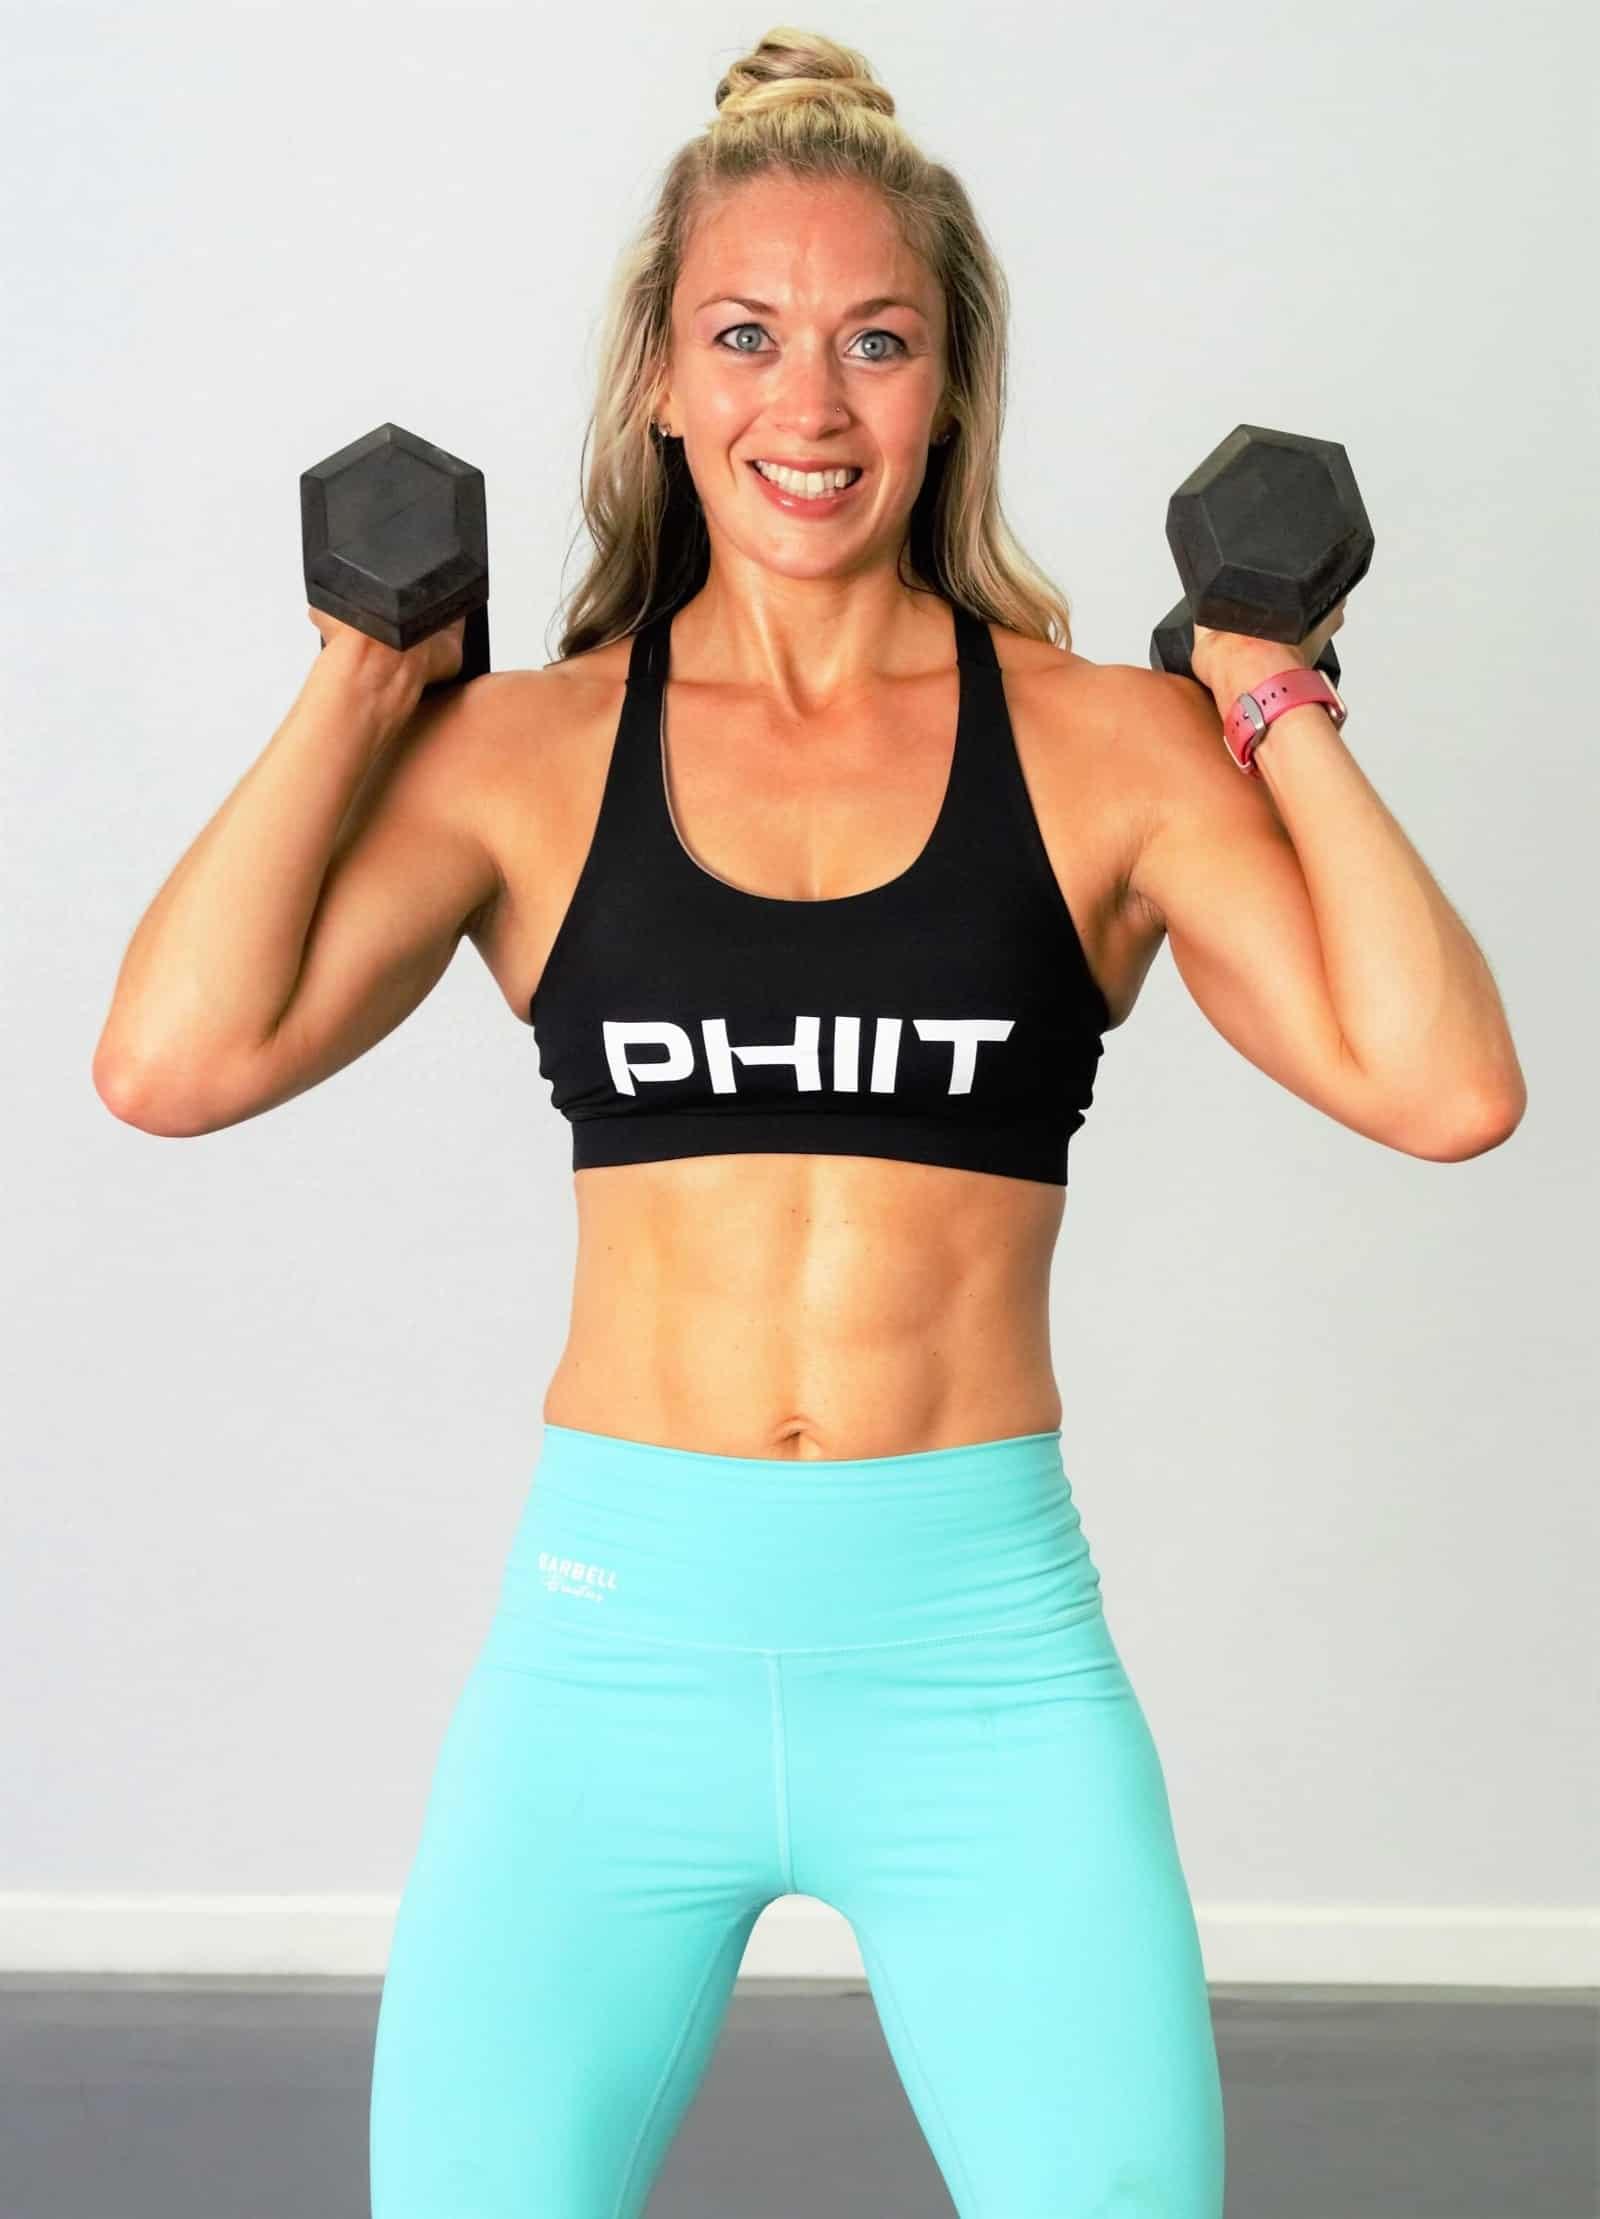 Introducing Rachel Bowles - Co-Creator and Lead Instructor of PHIIT Mom